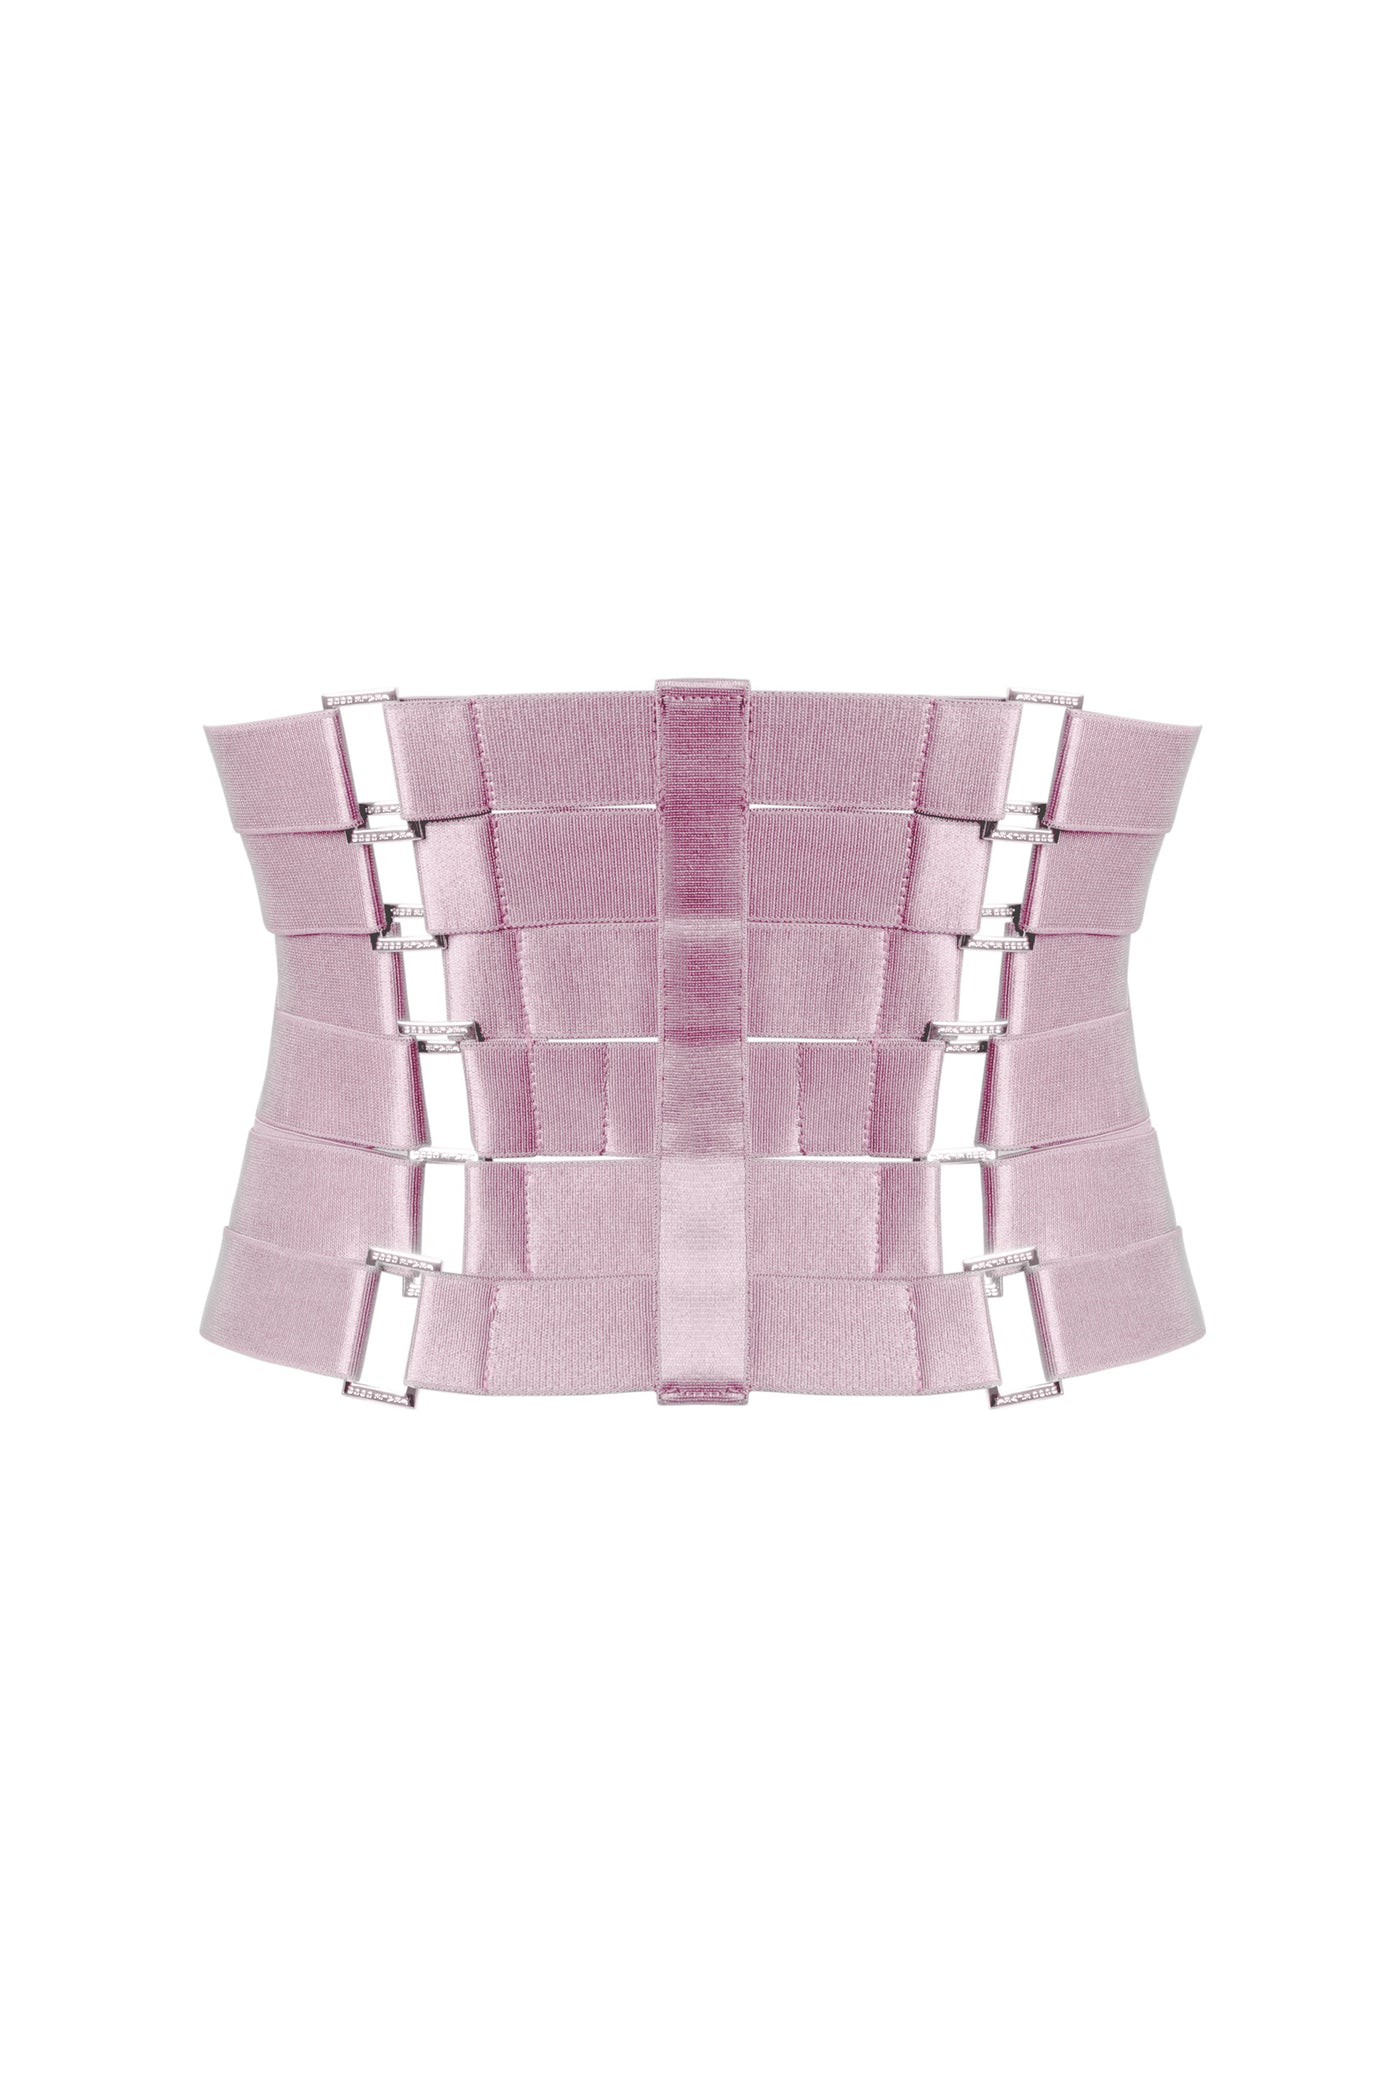 Corset Harness - Dusted Pink